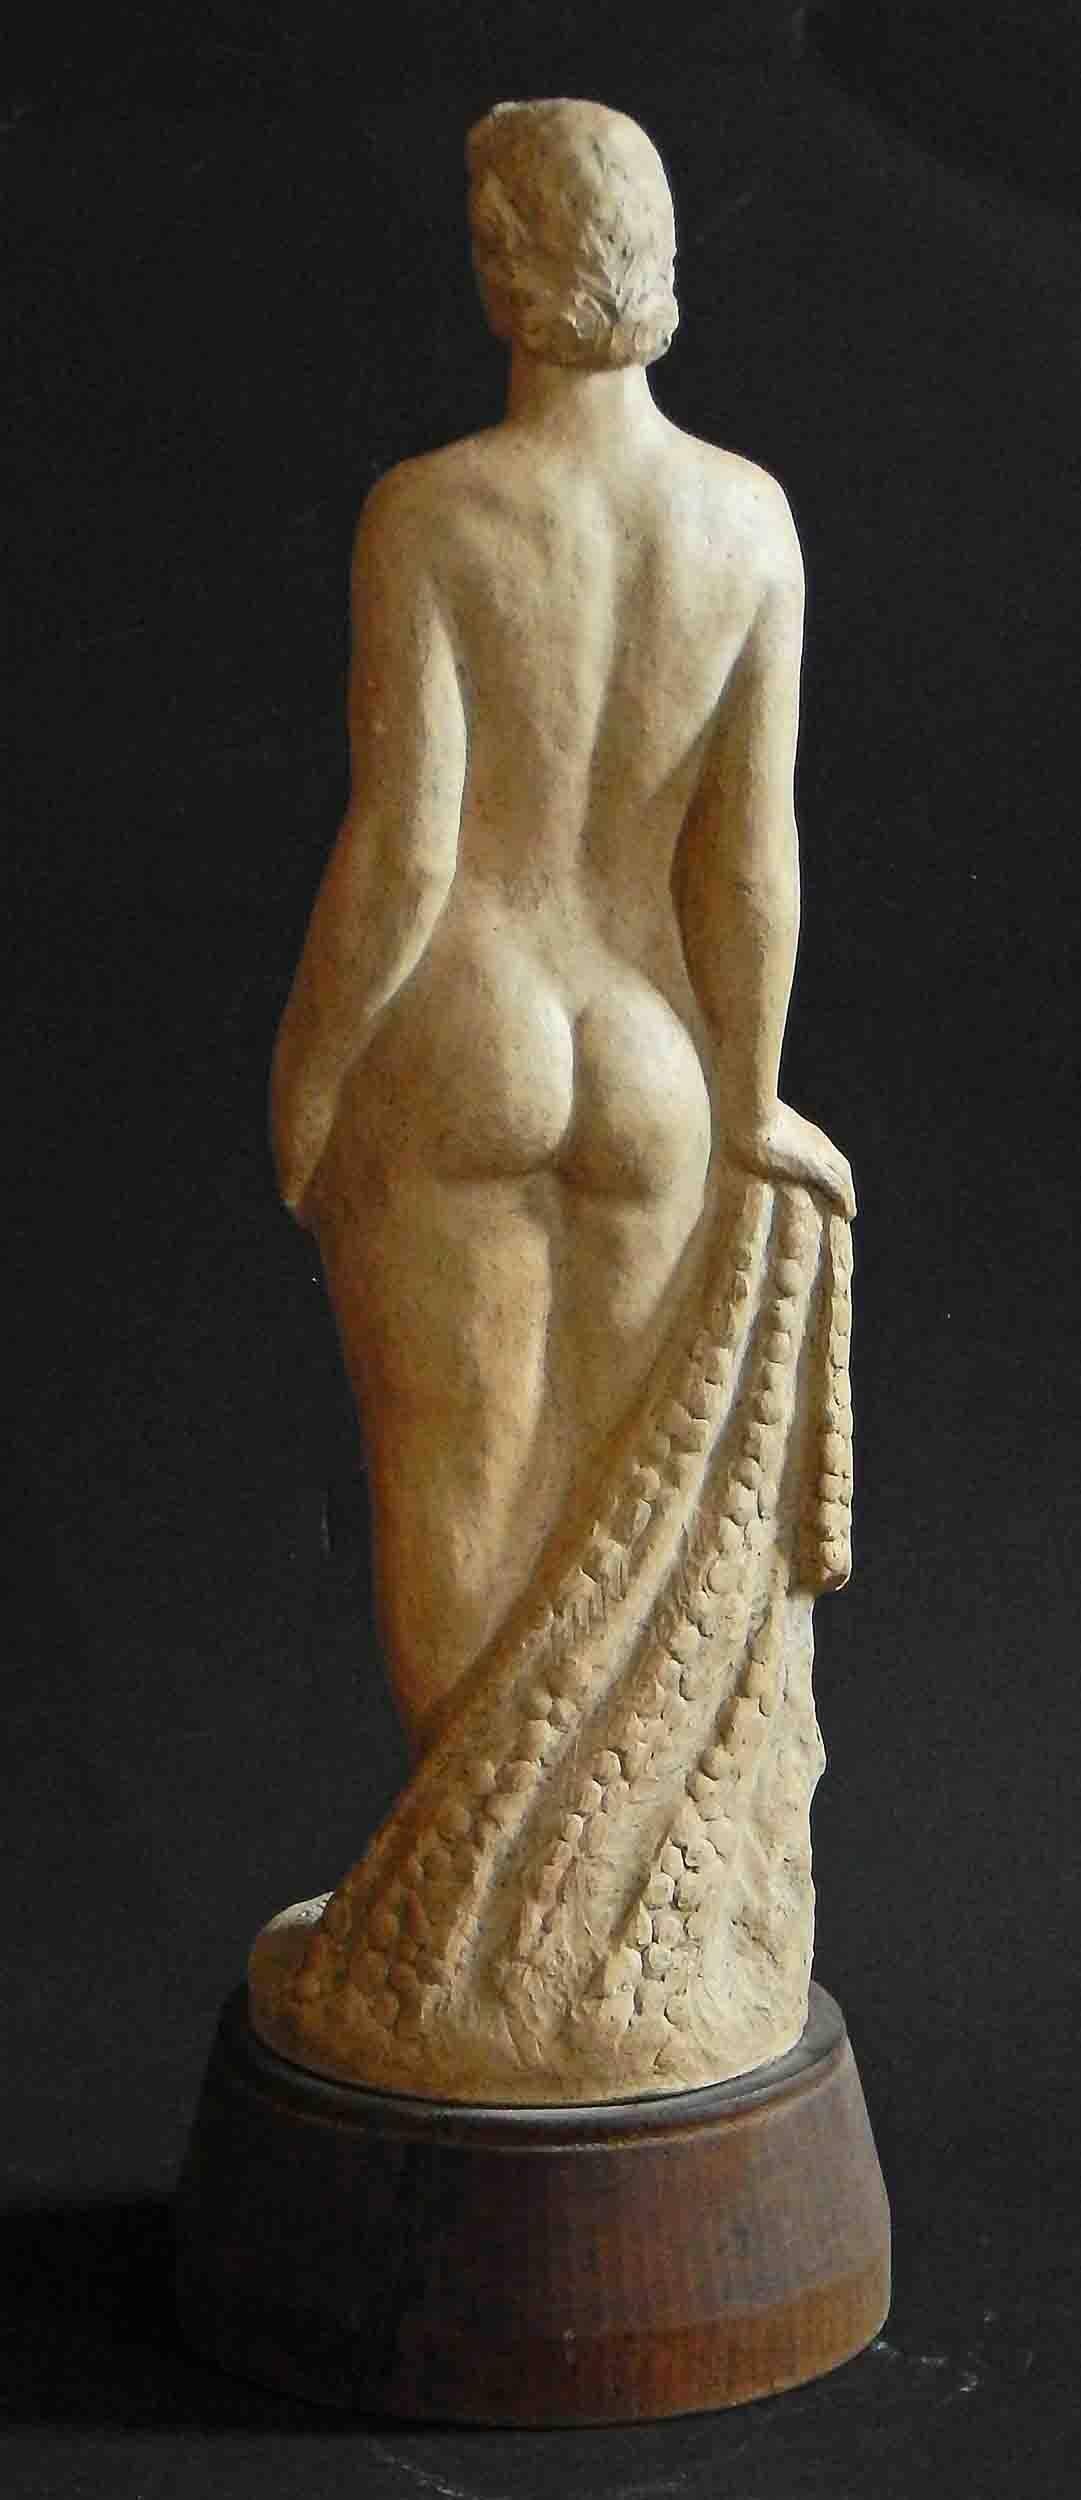 Imbued with dignity, gravity and Classic beauty, this rare terra cotta sculpture of a standing female nude was sculpted by Bruno Mankowski, a German American artist known for his murals and medallic art. Mankowski exhibited widely in the 1930s and